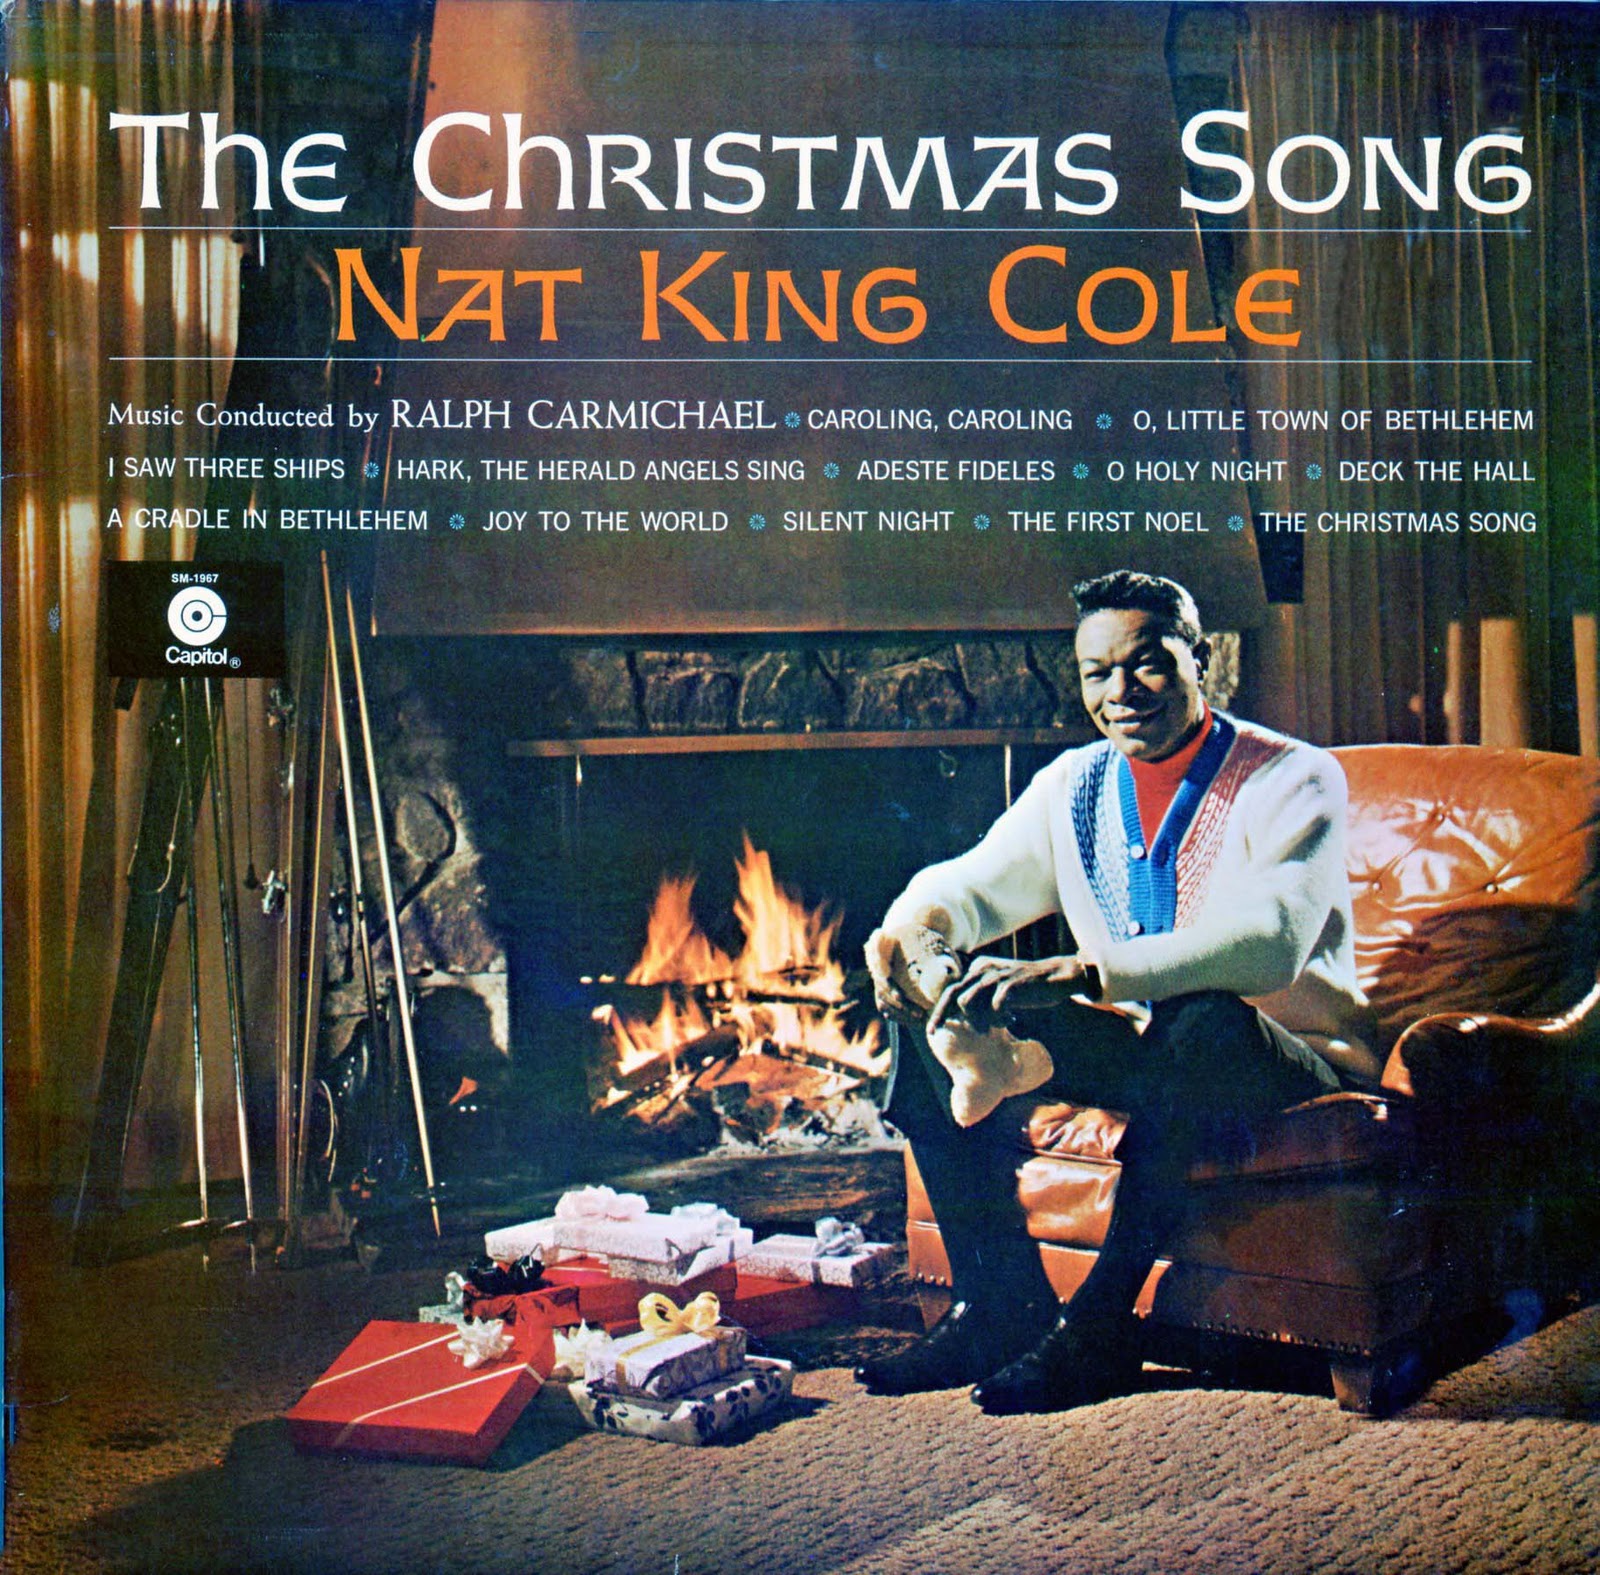 The story of Mel Torme’s "The Christmas Song" with Nat King Cole – christmaslpstocd